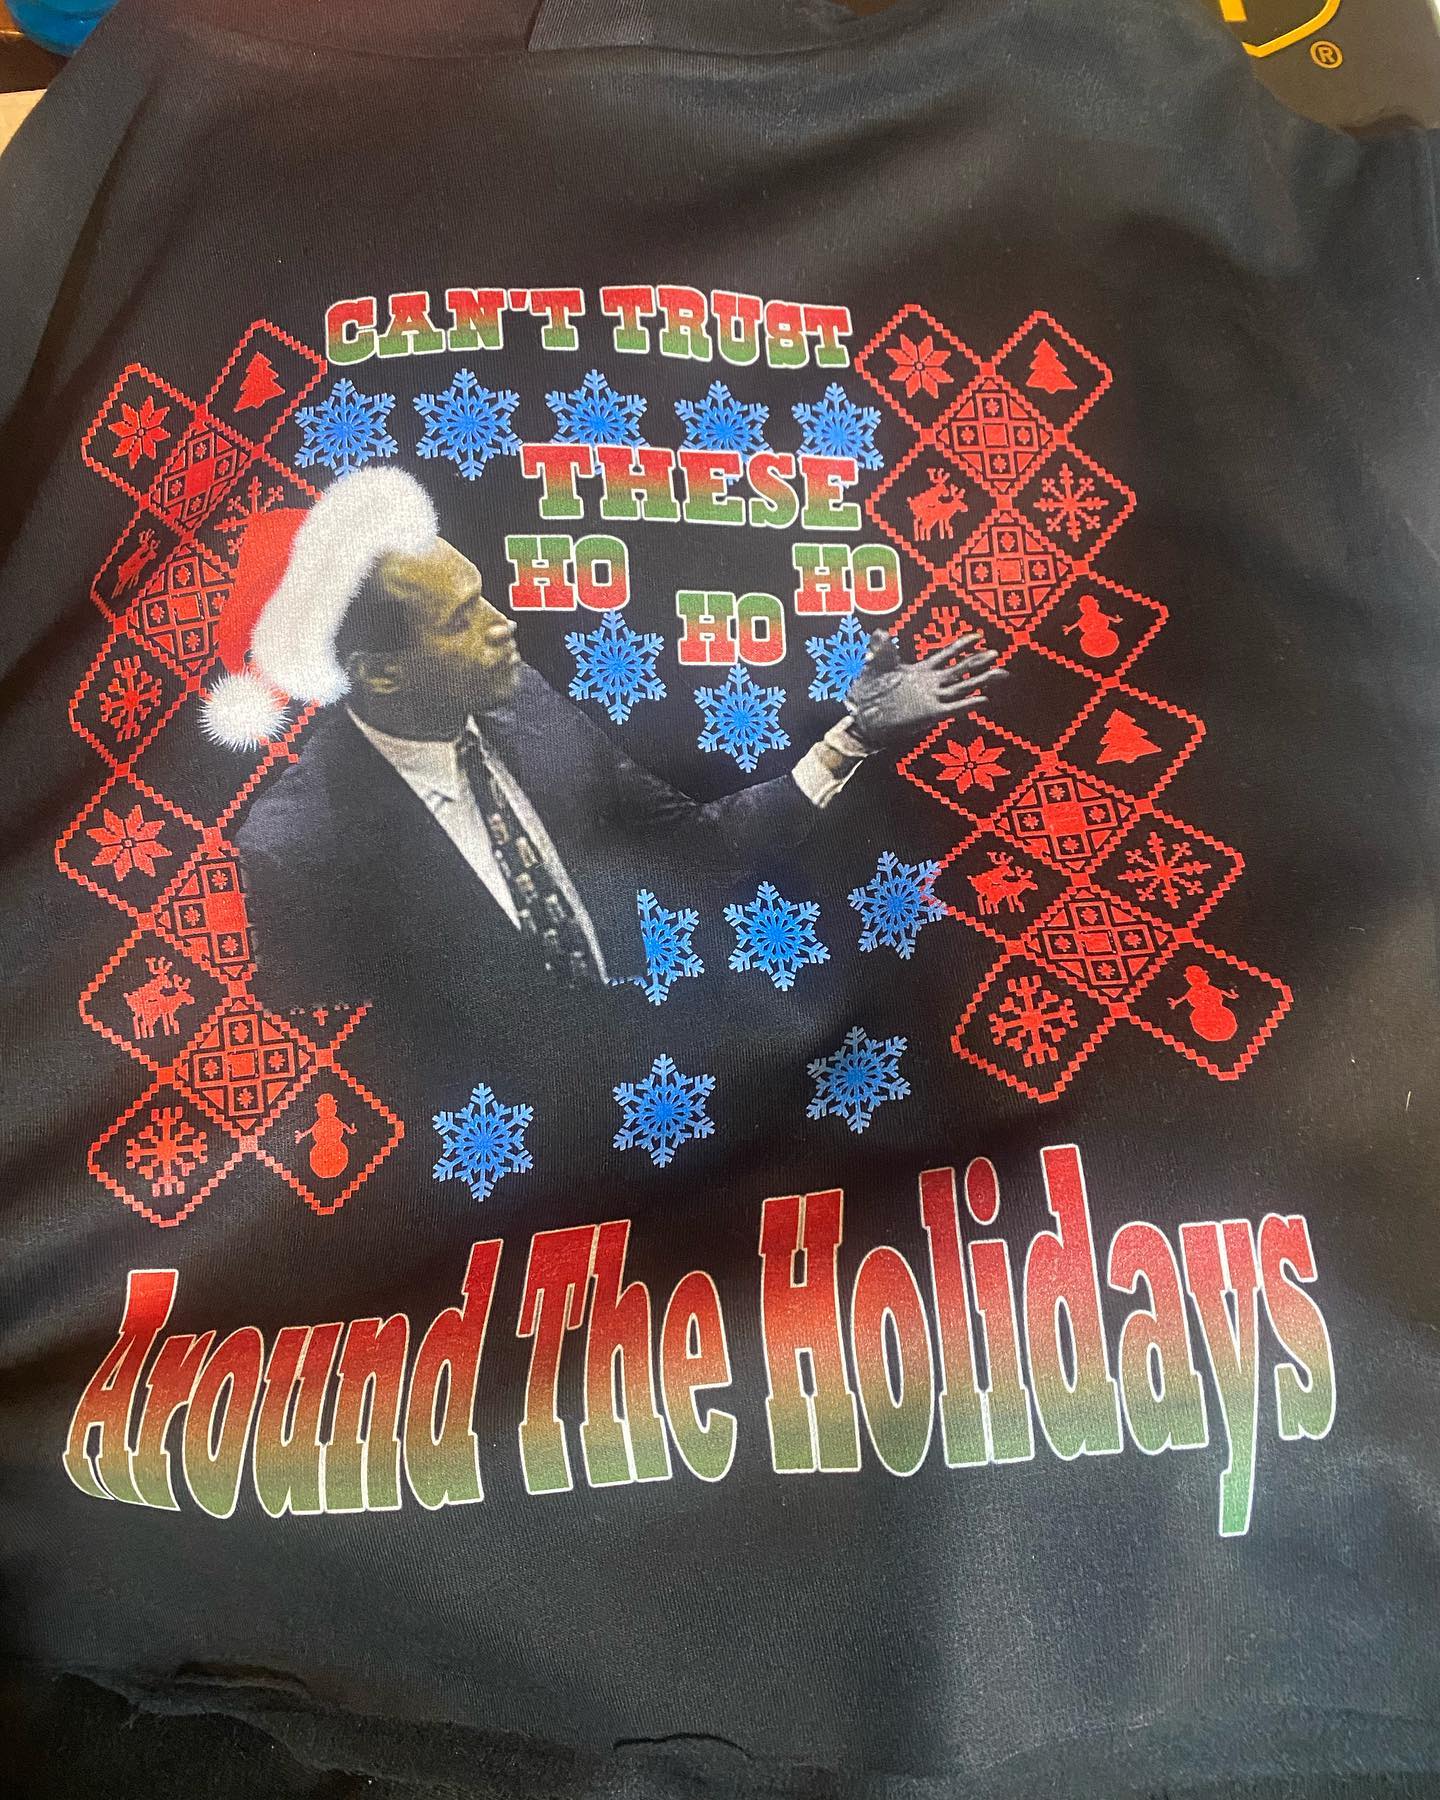 Custom graphic T-shirt with the words "Can't trust these ho ho ho around the holidays"